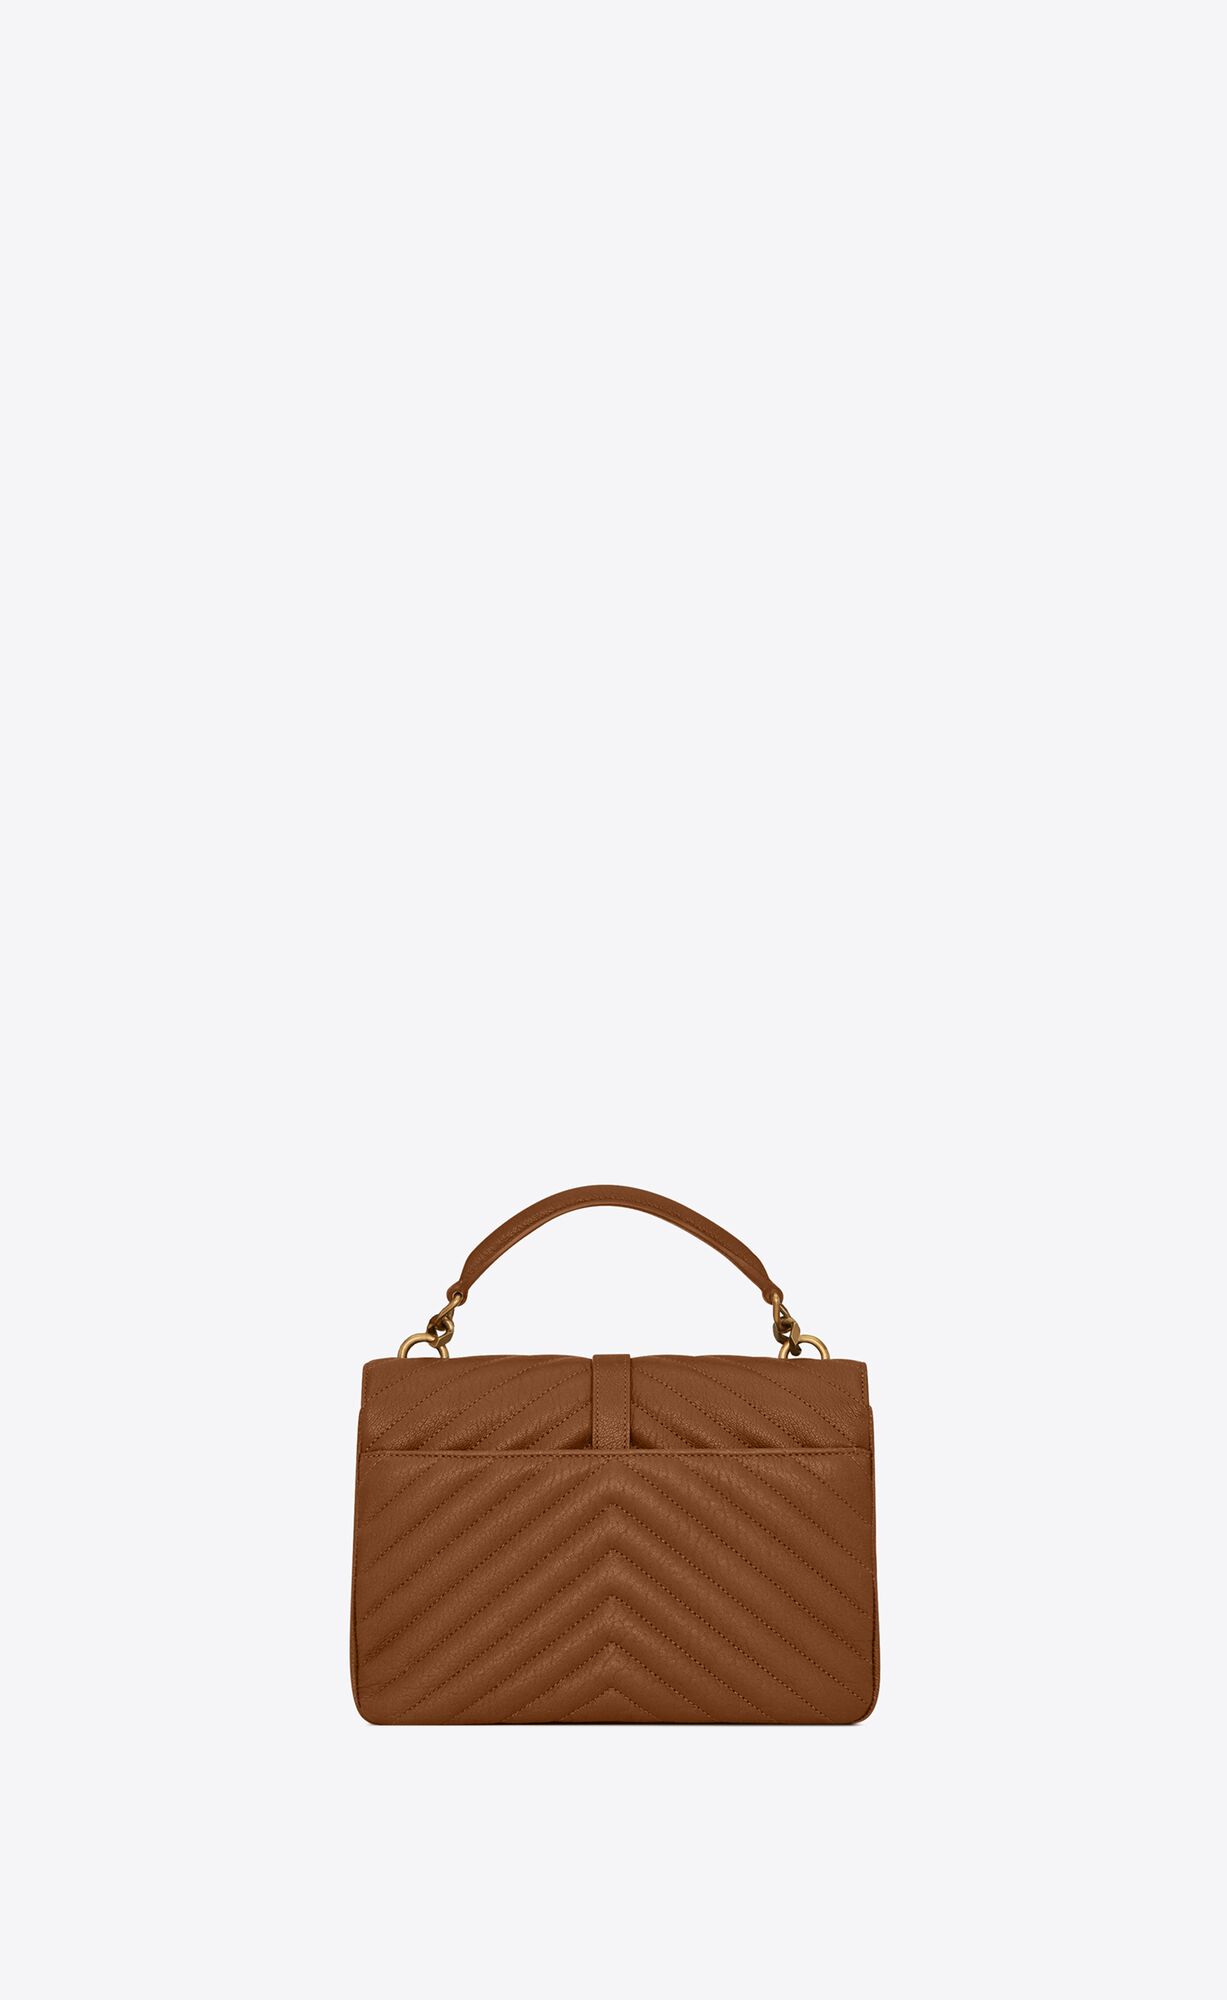 COLLEGE medium chain bag in quilted leather | Saint Laurent | YSL.com